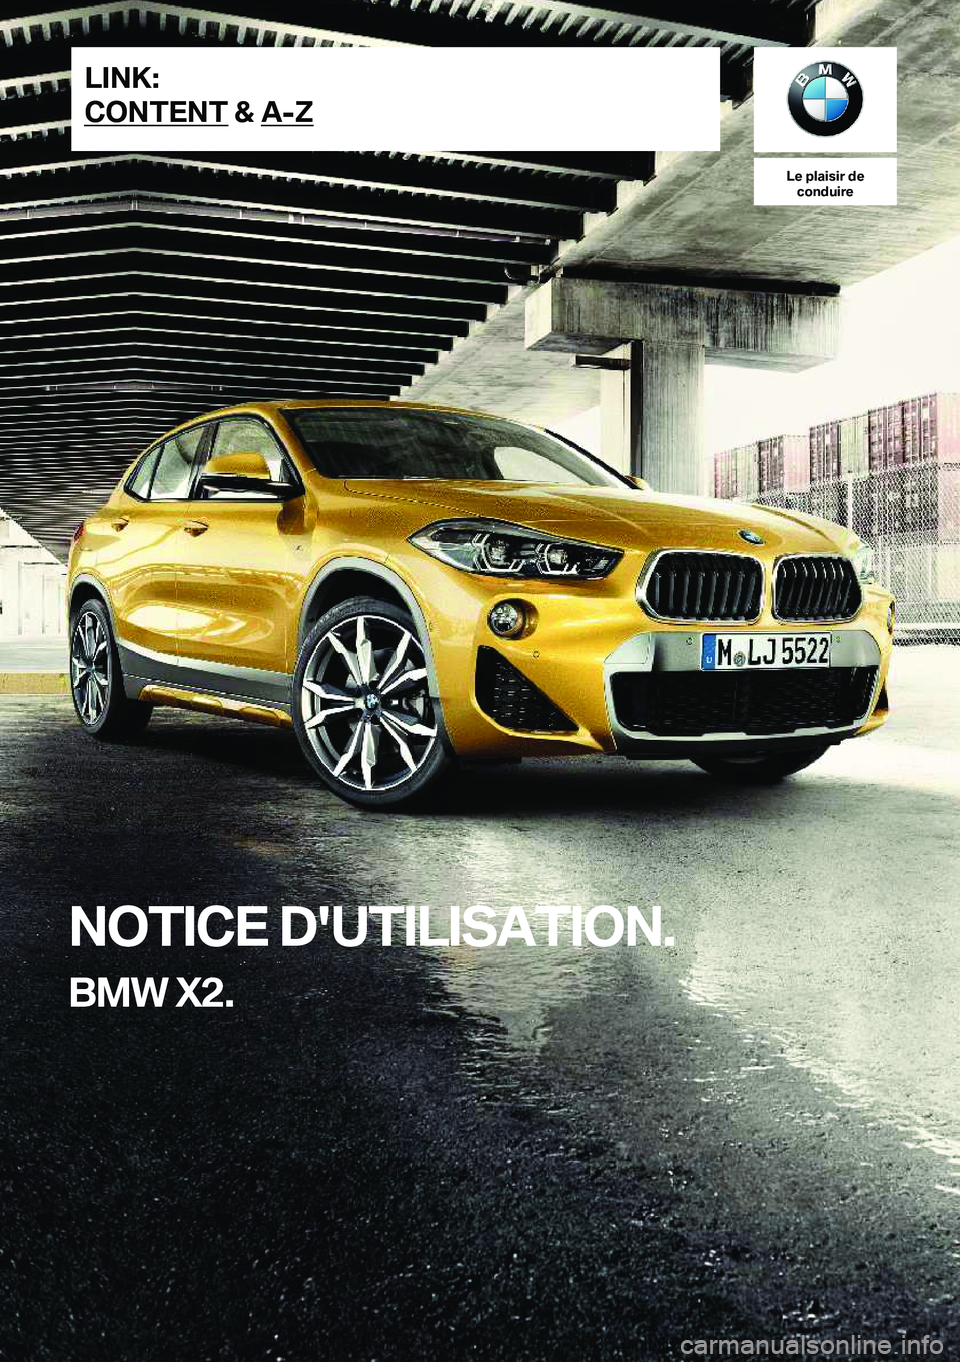 BMW X2 2019  Notices Demploi (in French) �L�e��p�l�a�i�s�i�r��d�e�c�o�n�d�u�i�r�e
�N�O�T�I�C�E��D�'�U�T�I�L�I�S�A�T�I�O�N�.
�B�M�W��X�2�.�L�I�N�K�:
�C�O�N�T�E�N�T��&��A�-�Z�O�n�l�i�n�e��E�d�i�t�i�o�n��f�o�r��P�a�r�t��n�o�.��0�